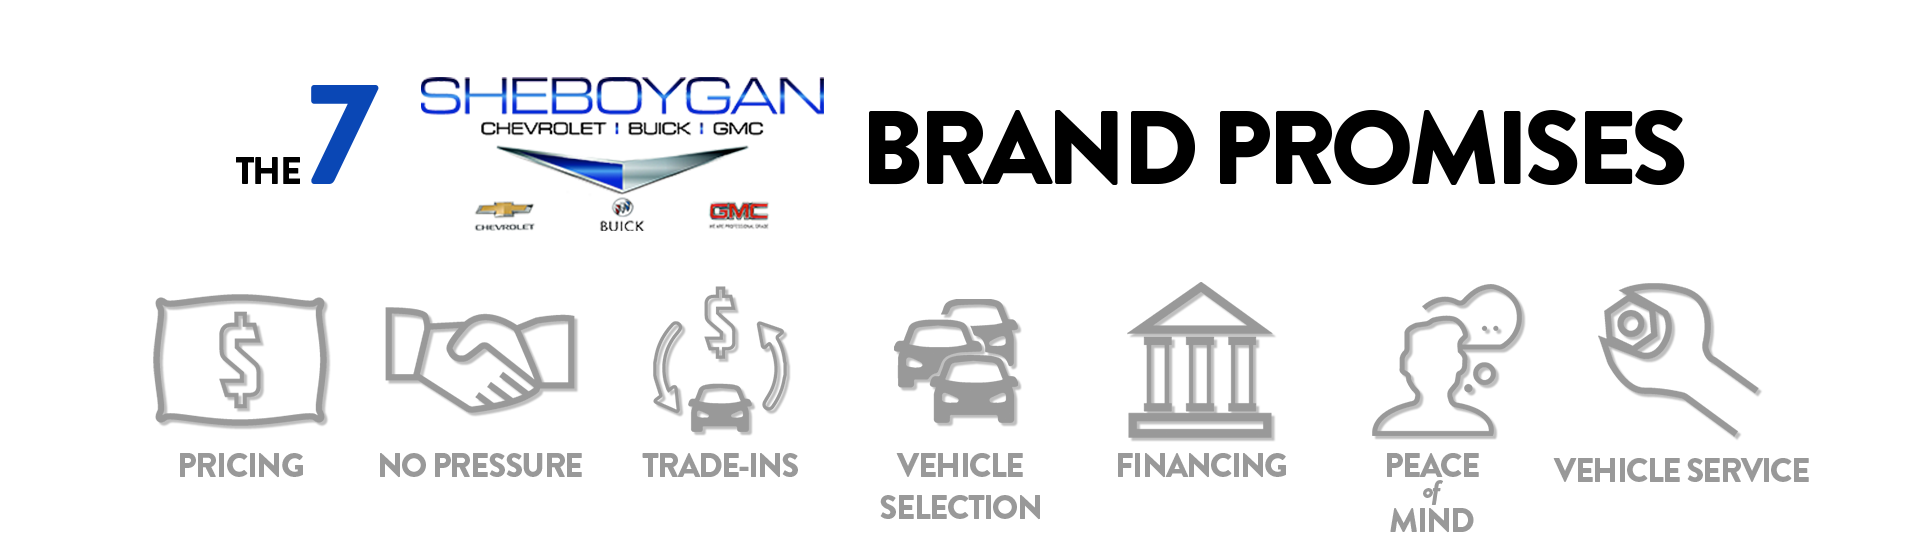 The 7 Sheboygan Auto Group Brand Promises: pricing, no pressure, trade-ins, vehicle selection, financing, peace of mind, vehicle service.